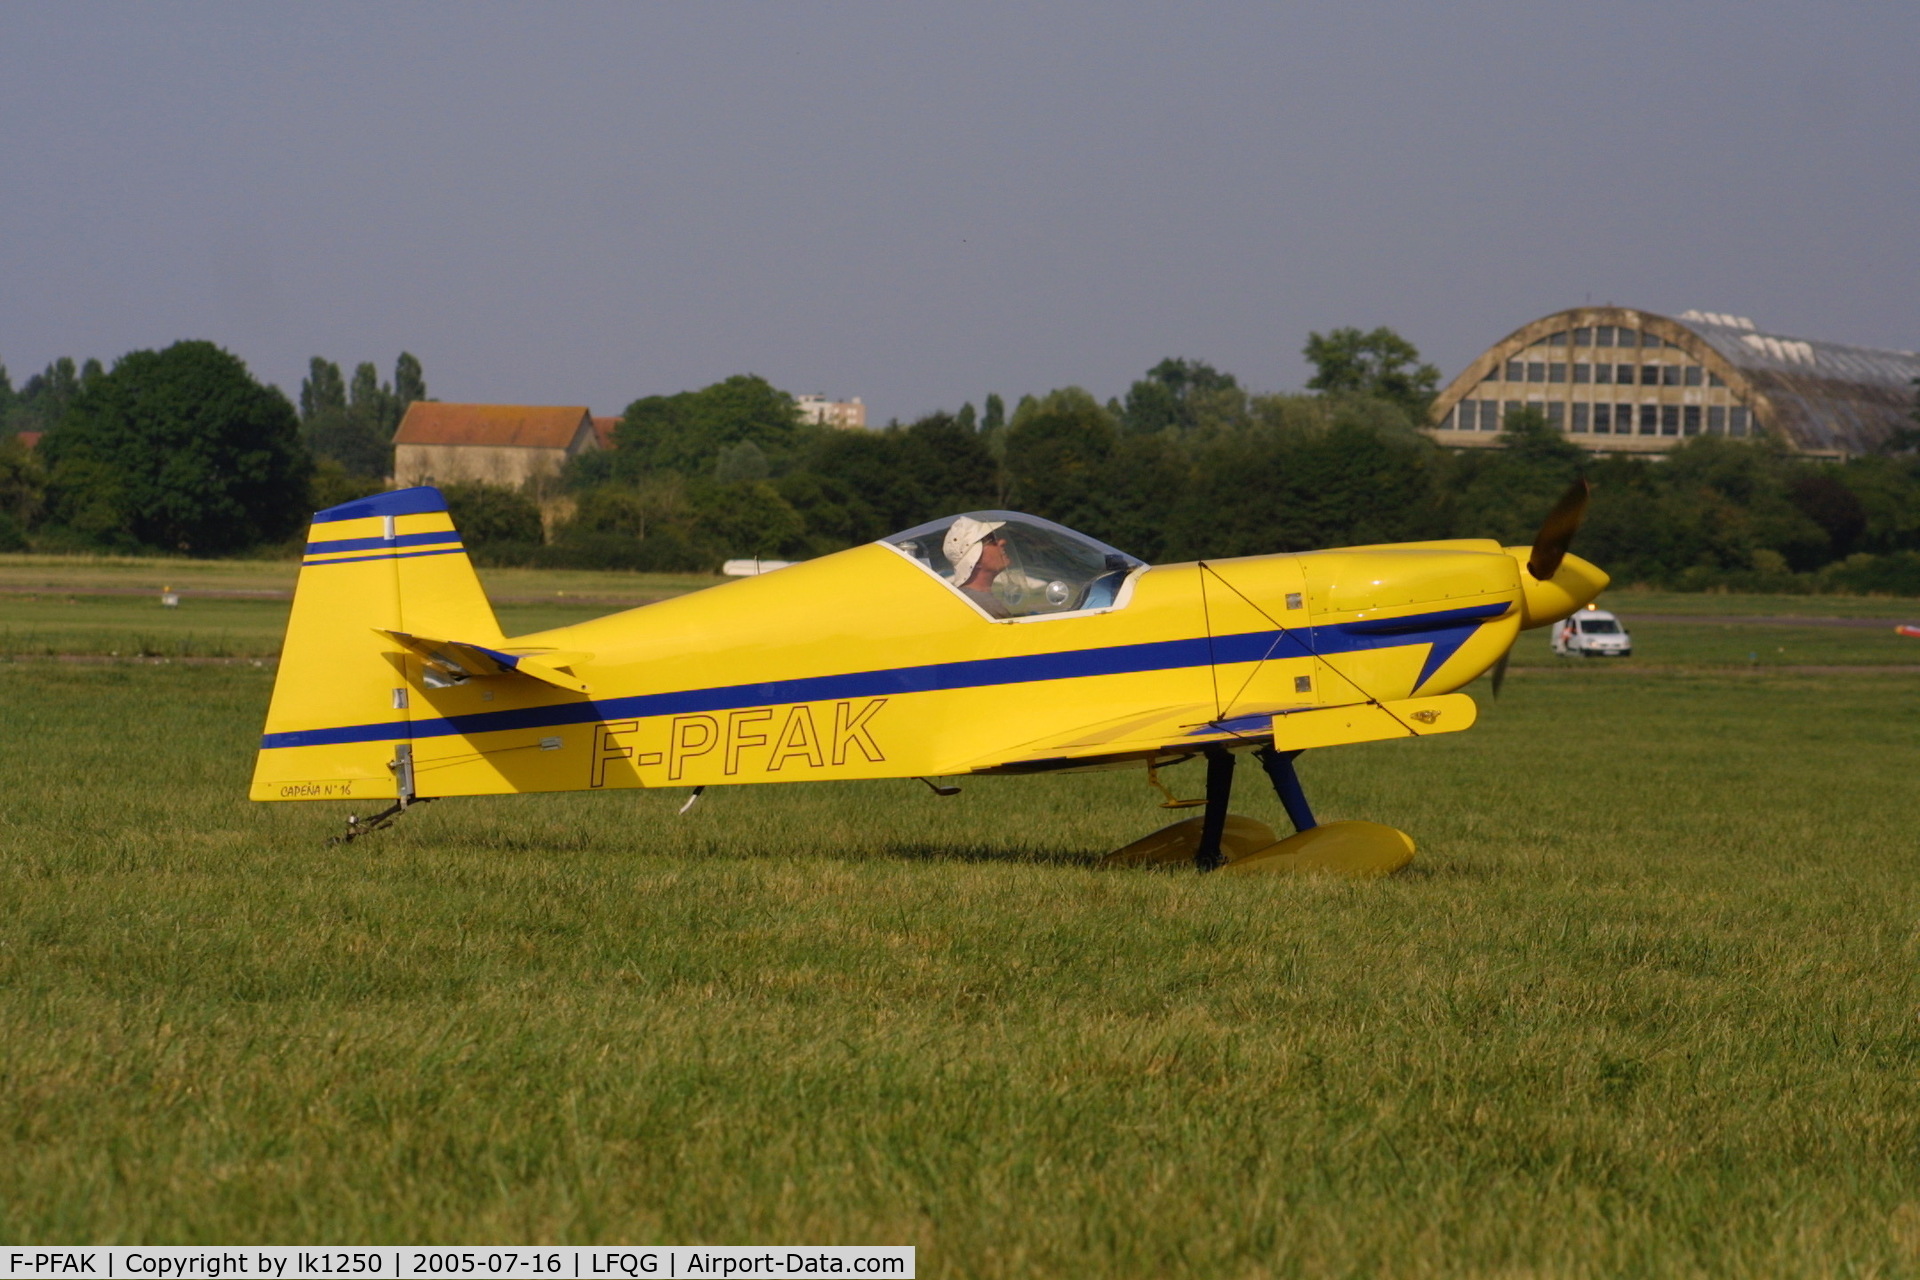 F-PFAK, Pena Capena C C/N 16, This Pena Capena was at Nevers in July 2005 while attending the RSA Rallye